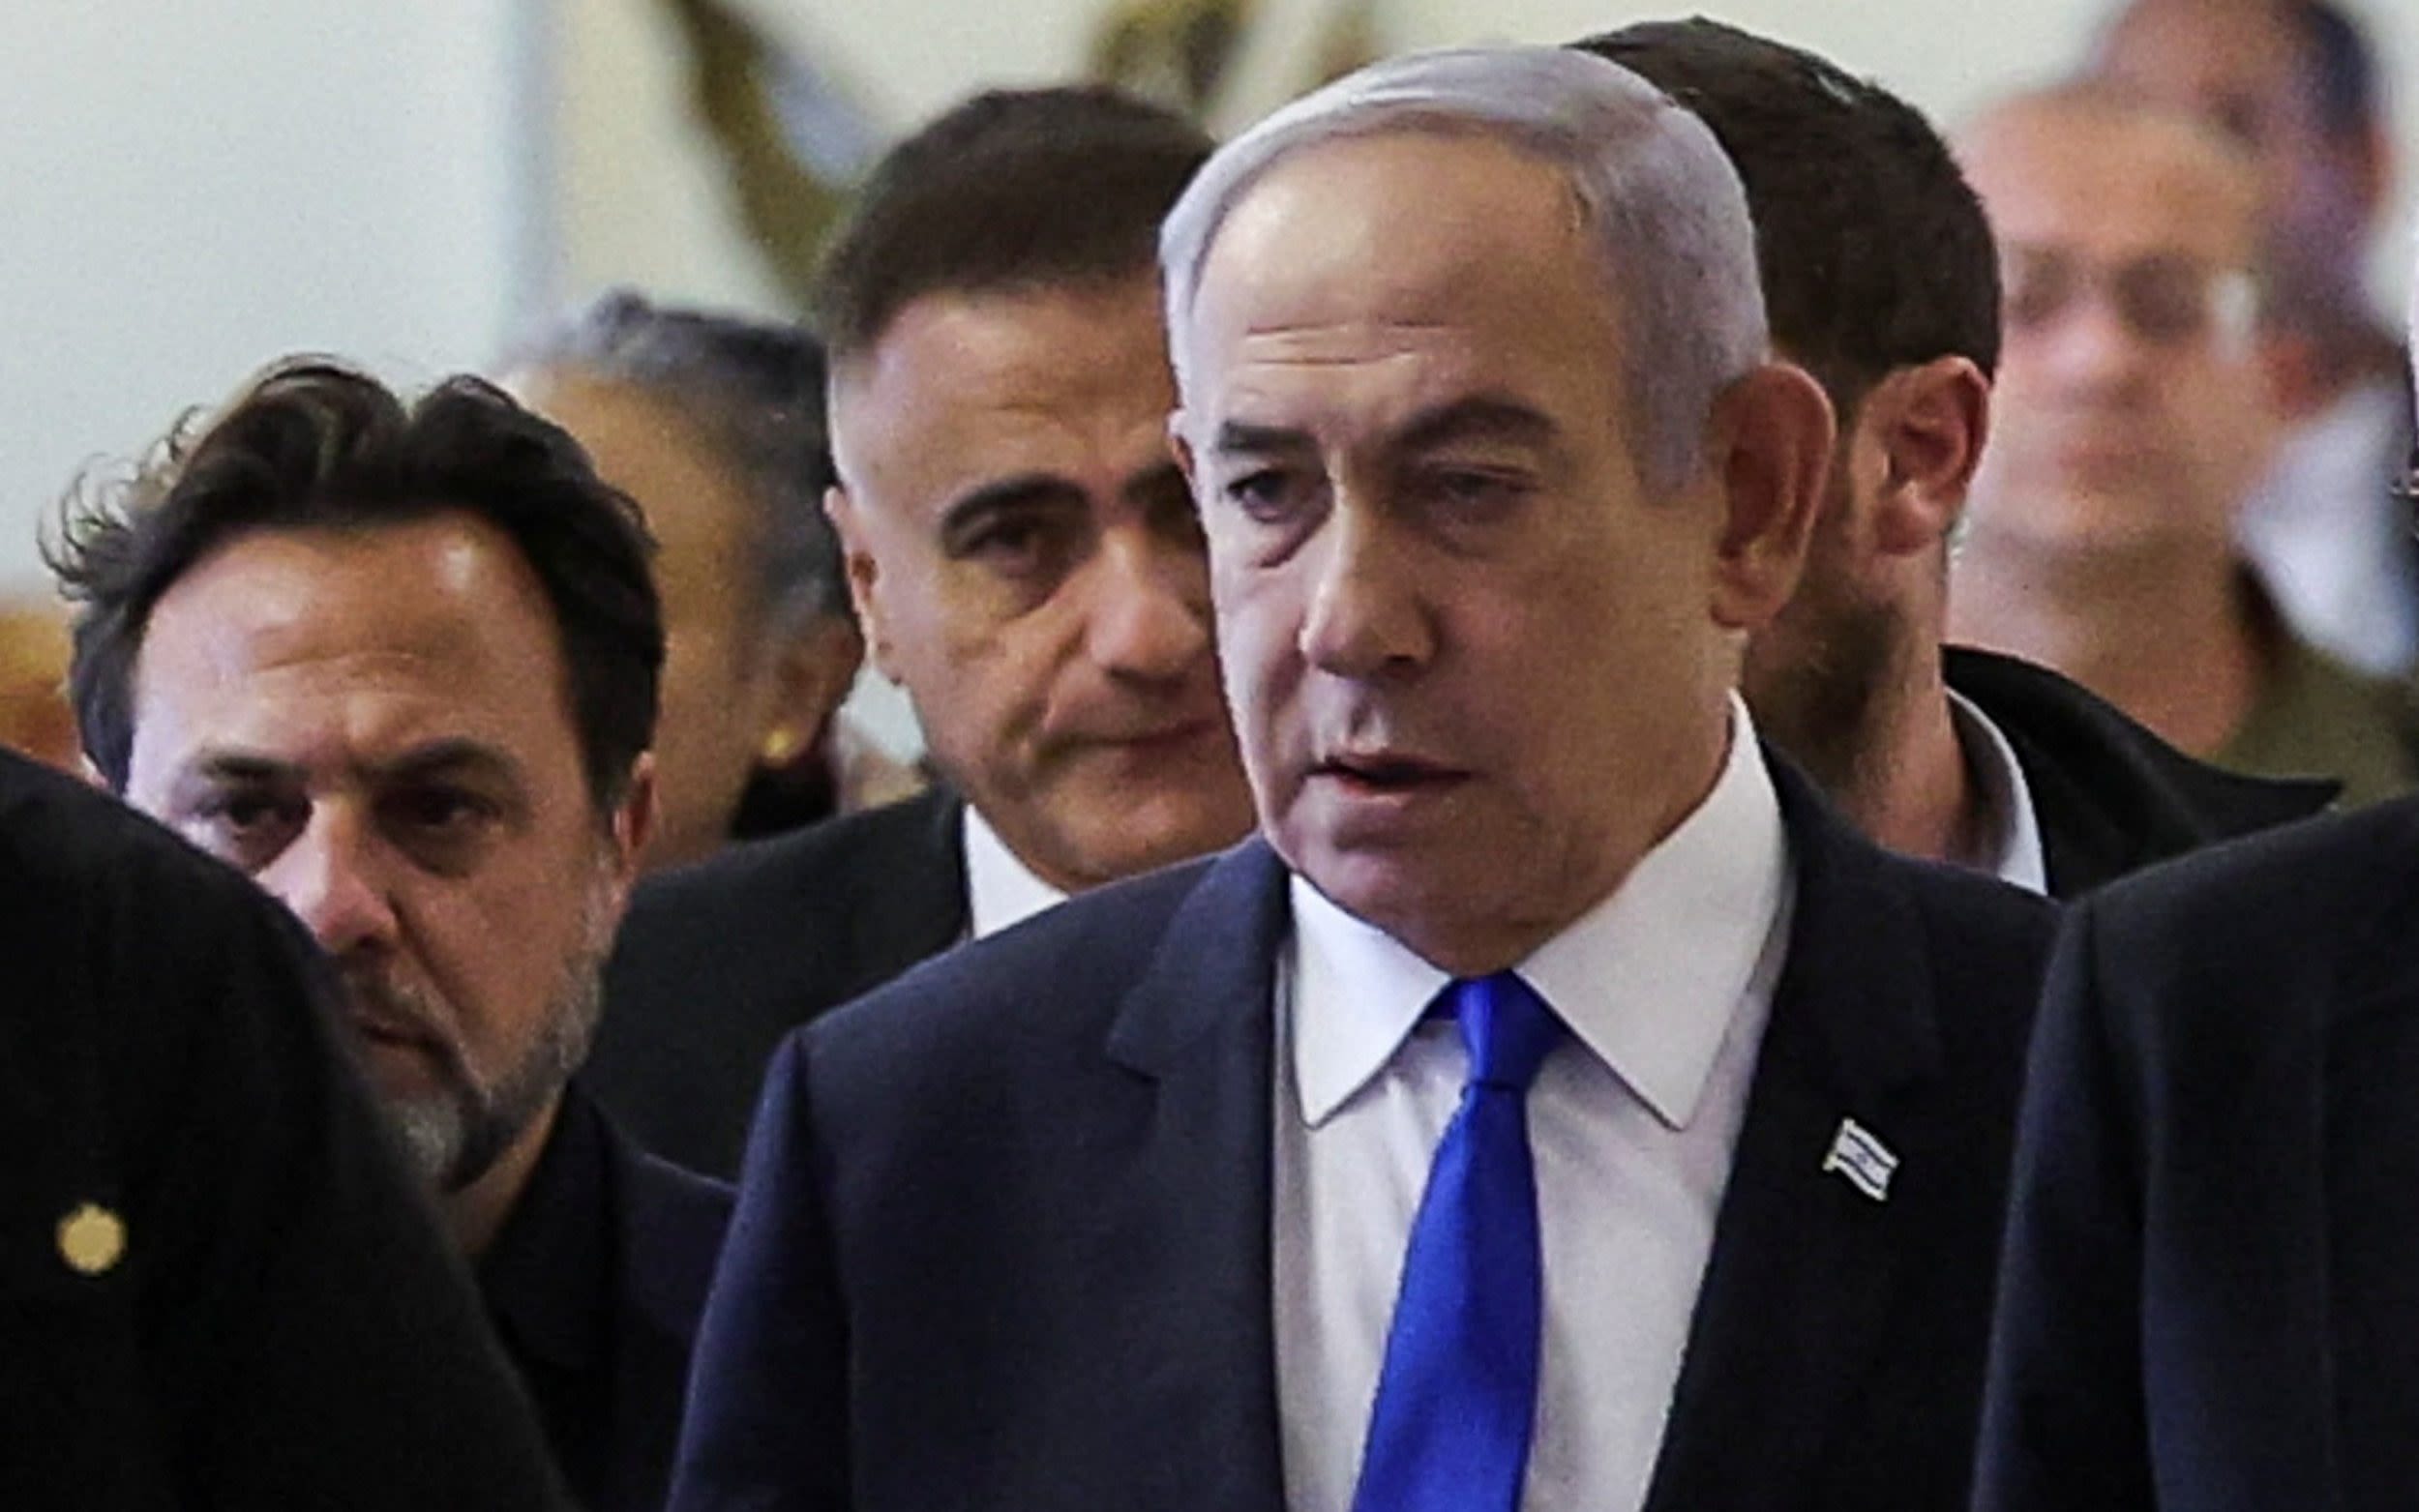 Netanyahu’s worst fear of an ICC arrest warrant is likely to unite Israel around its leaders